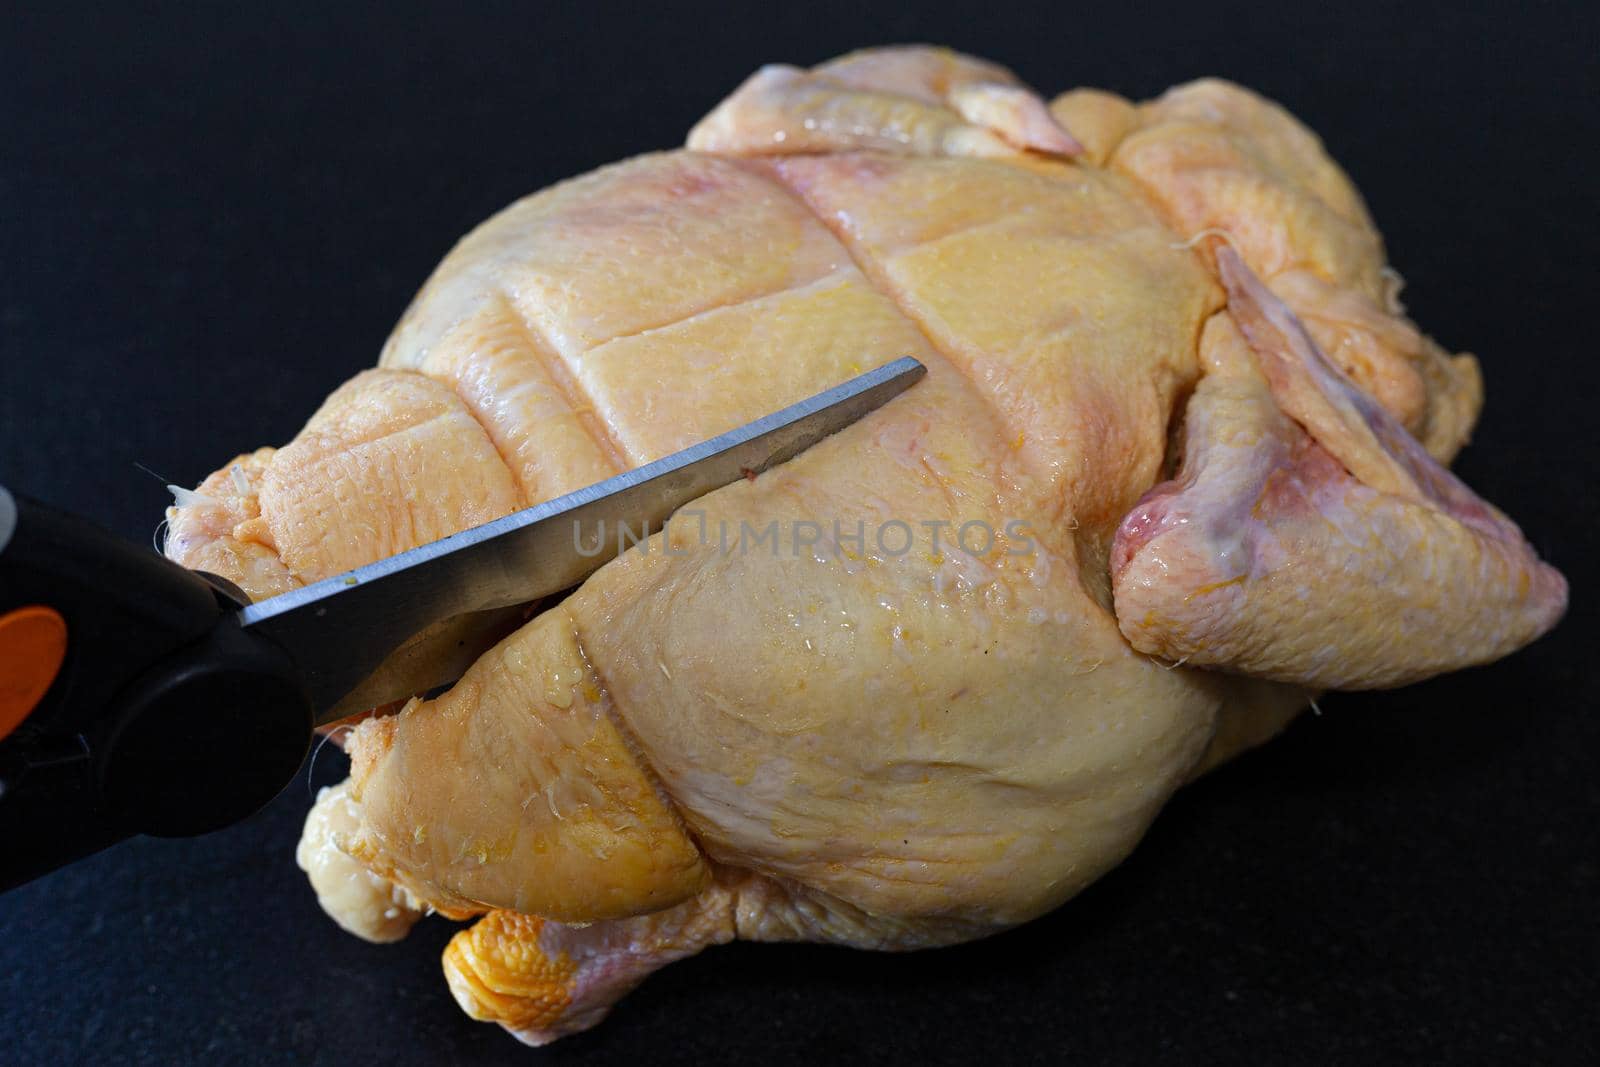 Cutting back of a french mais chicken